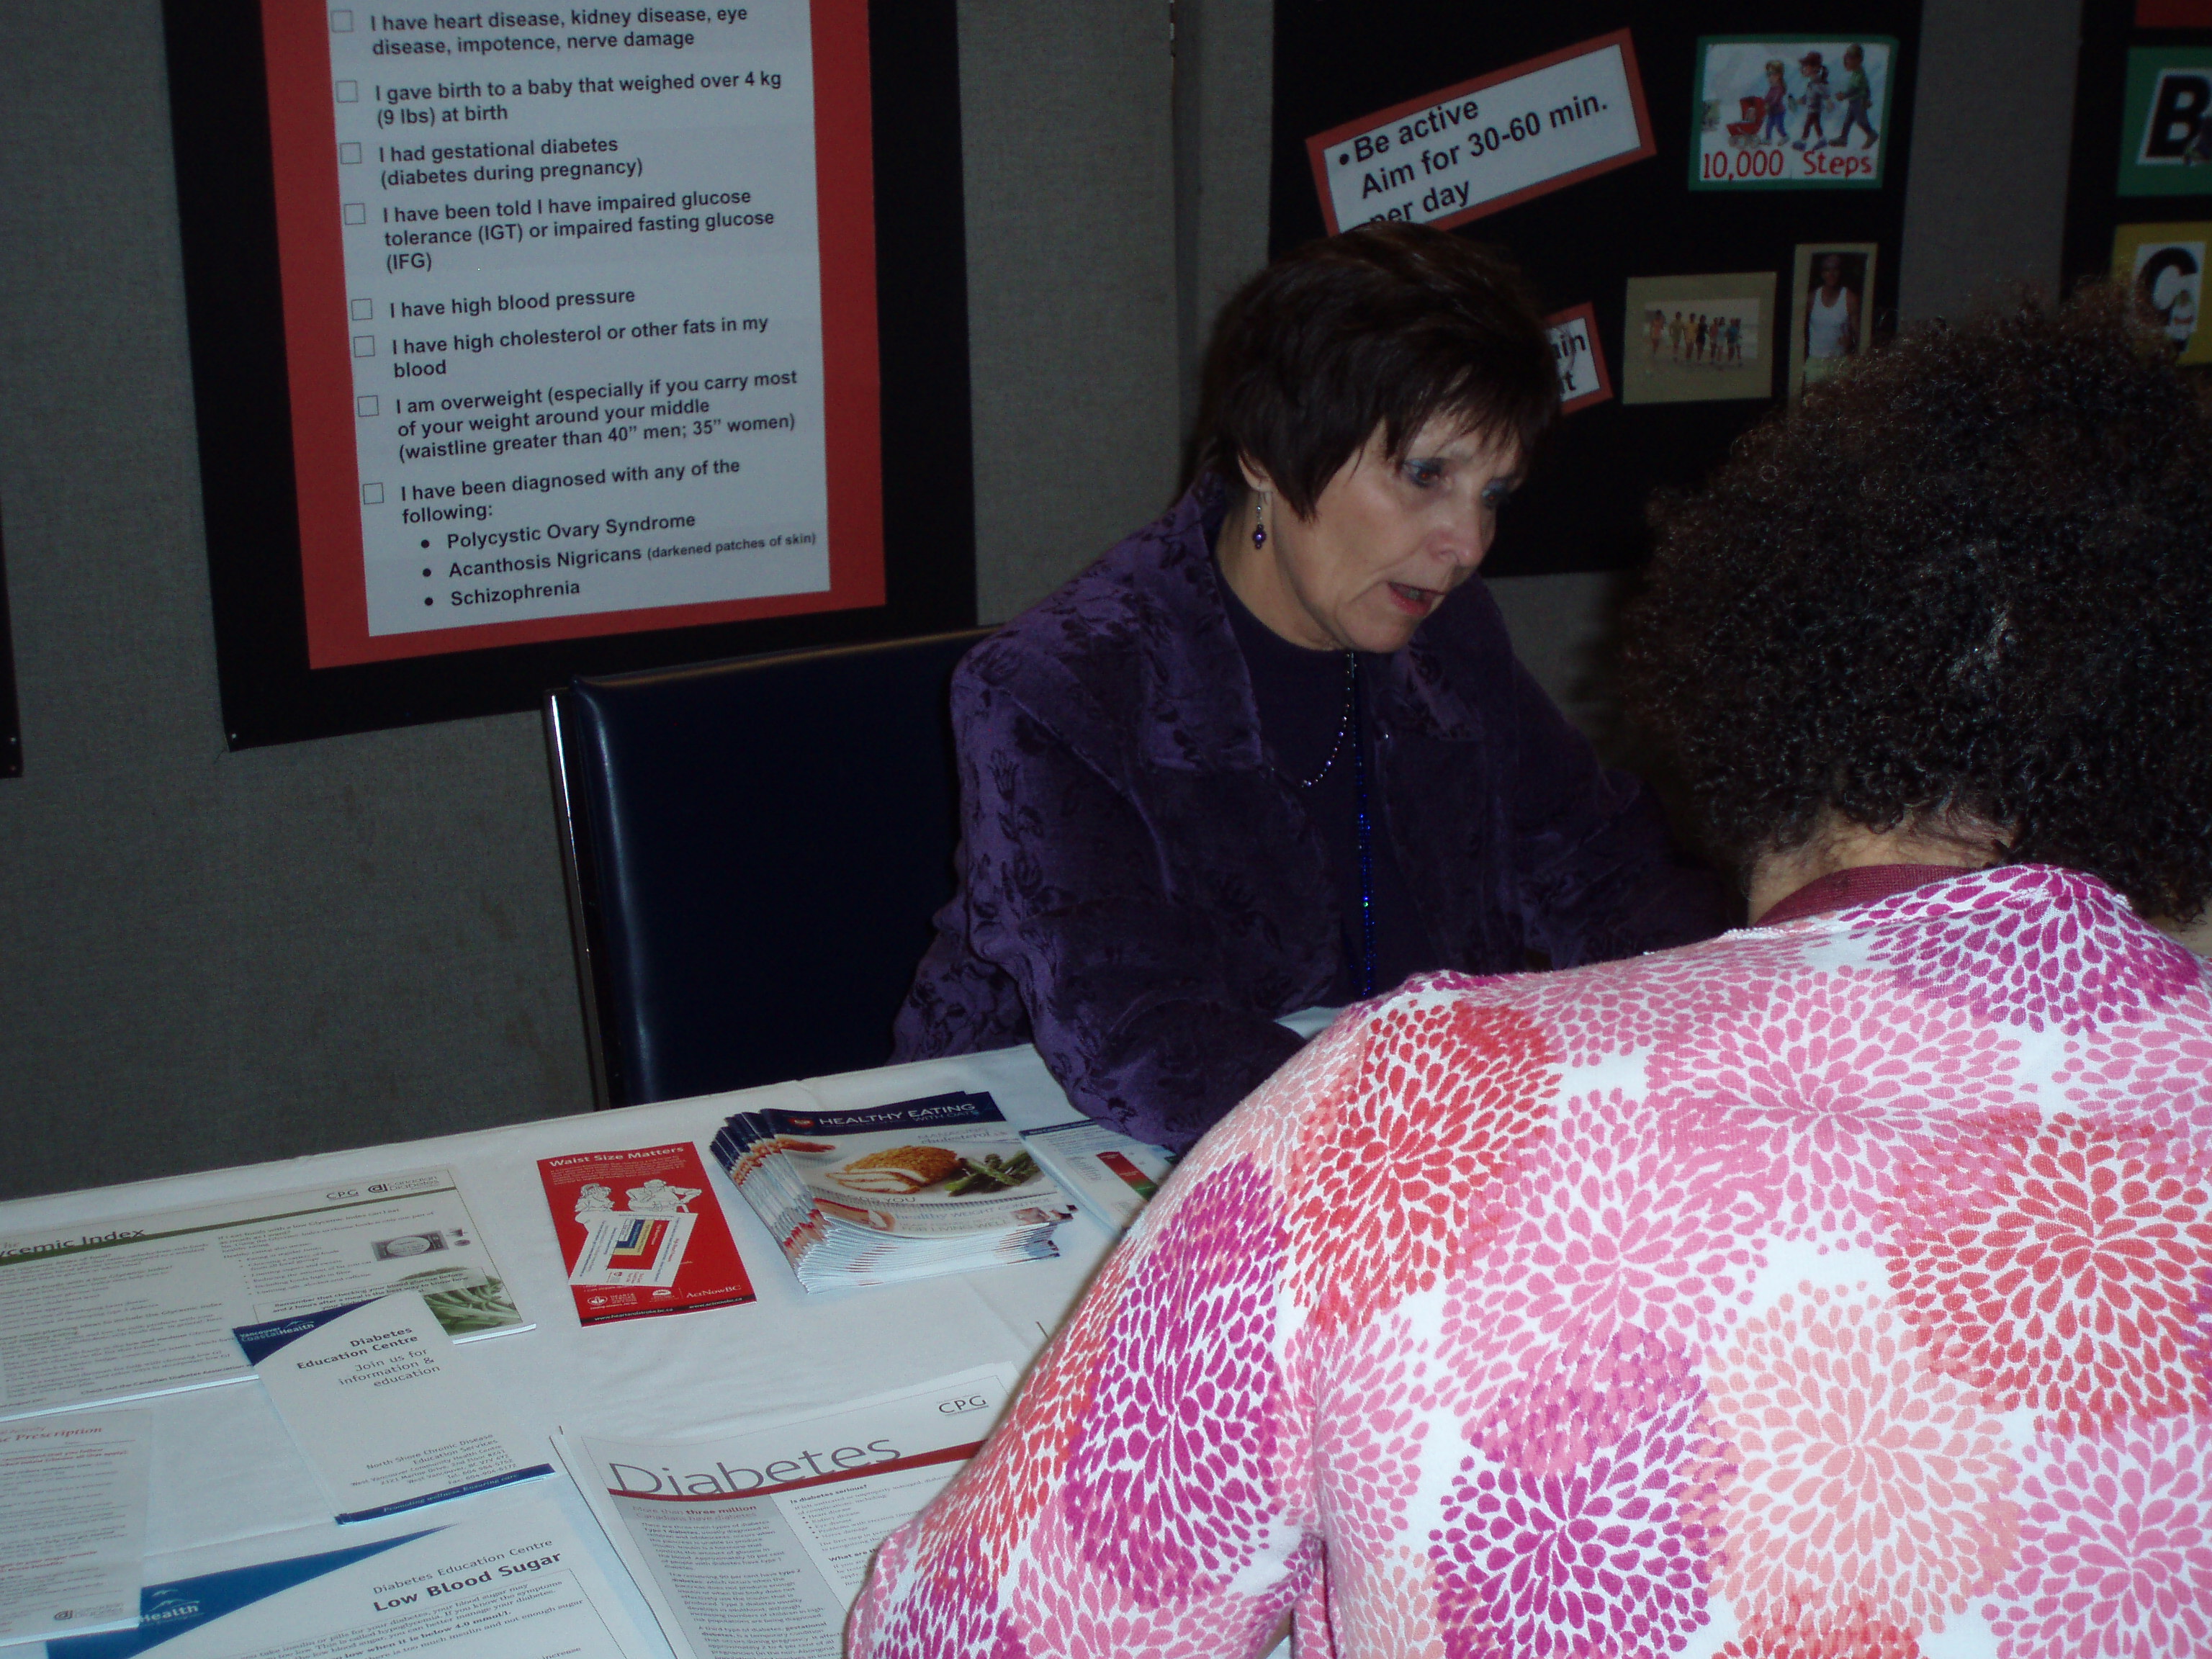 Danielle Bergstrom, RD, discusses diabetes risk with a VCH employee at Lions Gate Hospital